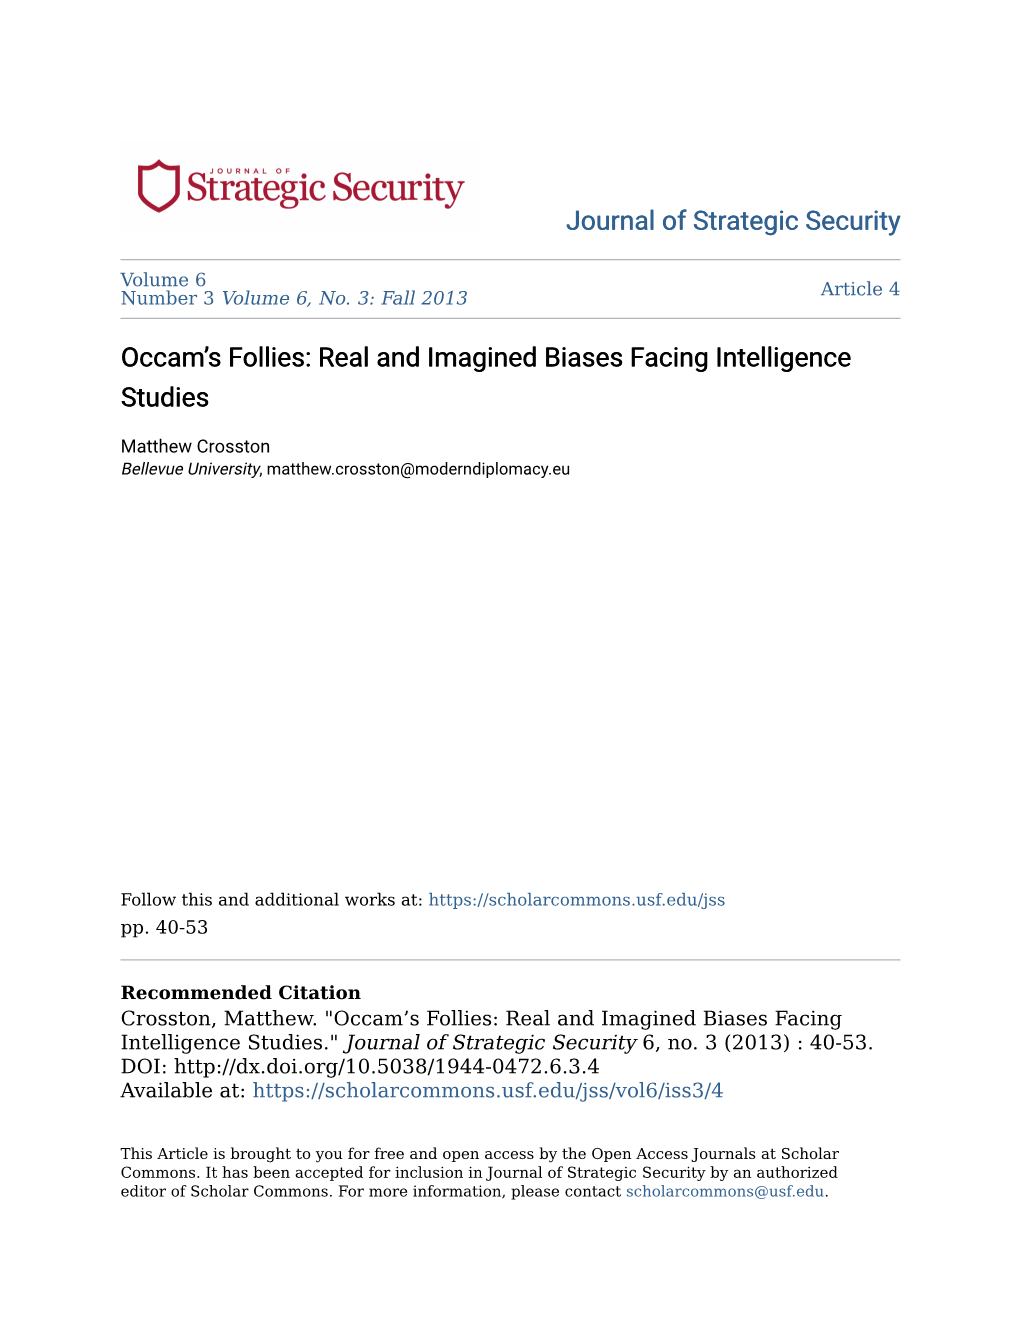 Real and Imagined Biases Facing Intelligence Studies